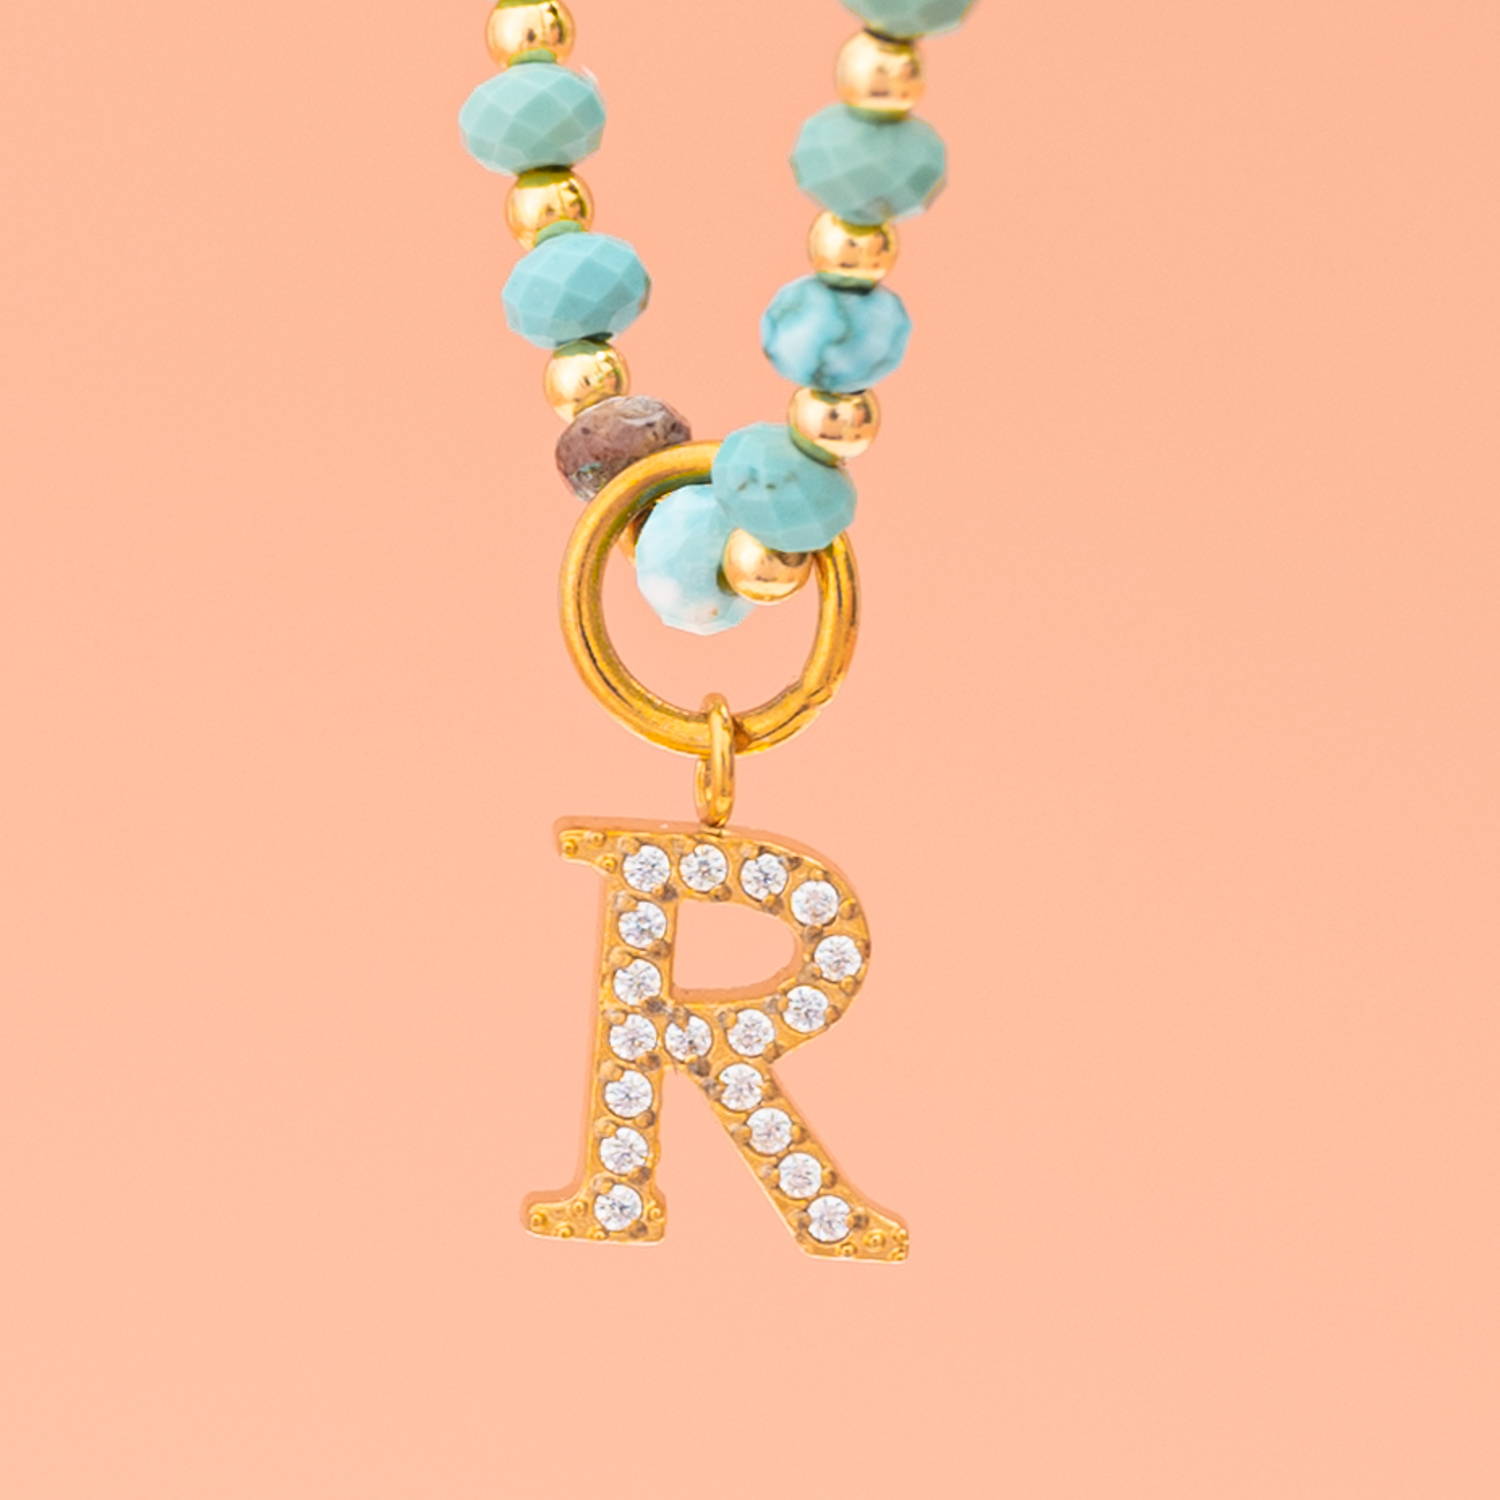 https://wholesale.starfishproject.com/collections/mothers-day-collection/products/turquoise-beaded-necklace-with-initial-charm